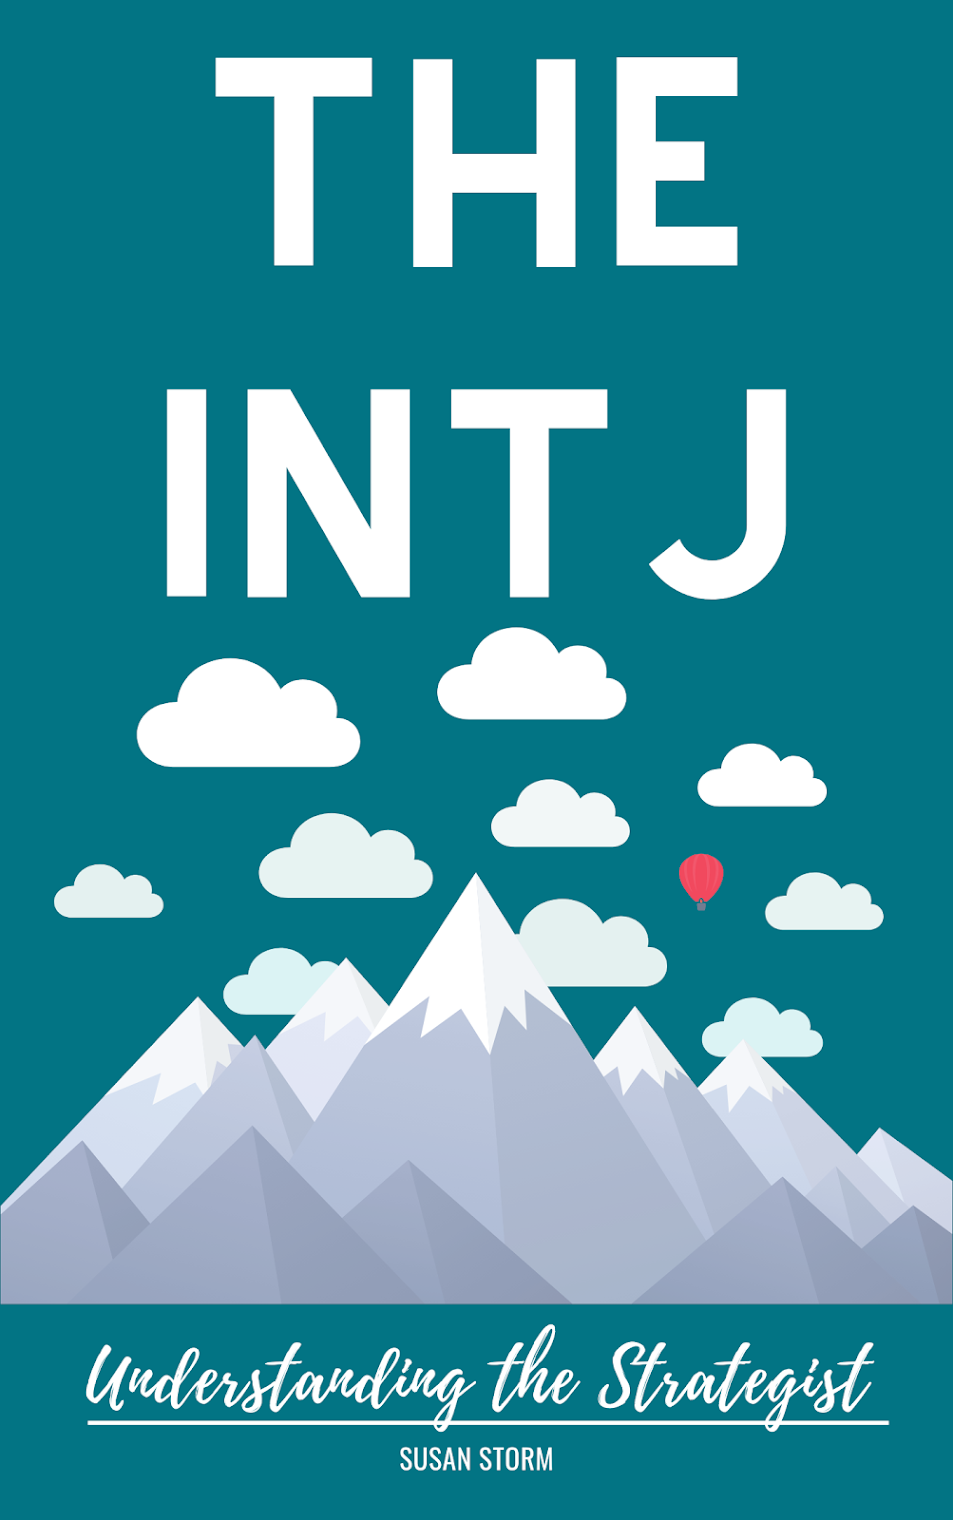 The INTJ Journal: Values & mission guidance and self-care & self-discovery  prompts for the INTJ personality type (MBTI Personality Types Books)